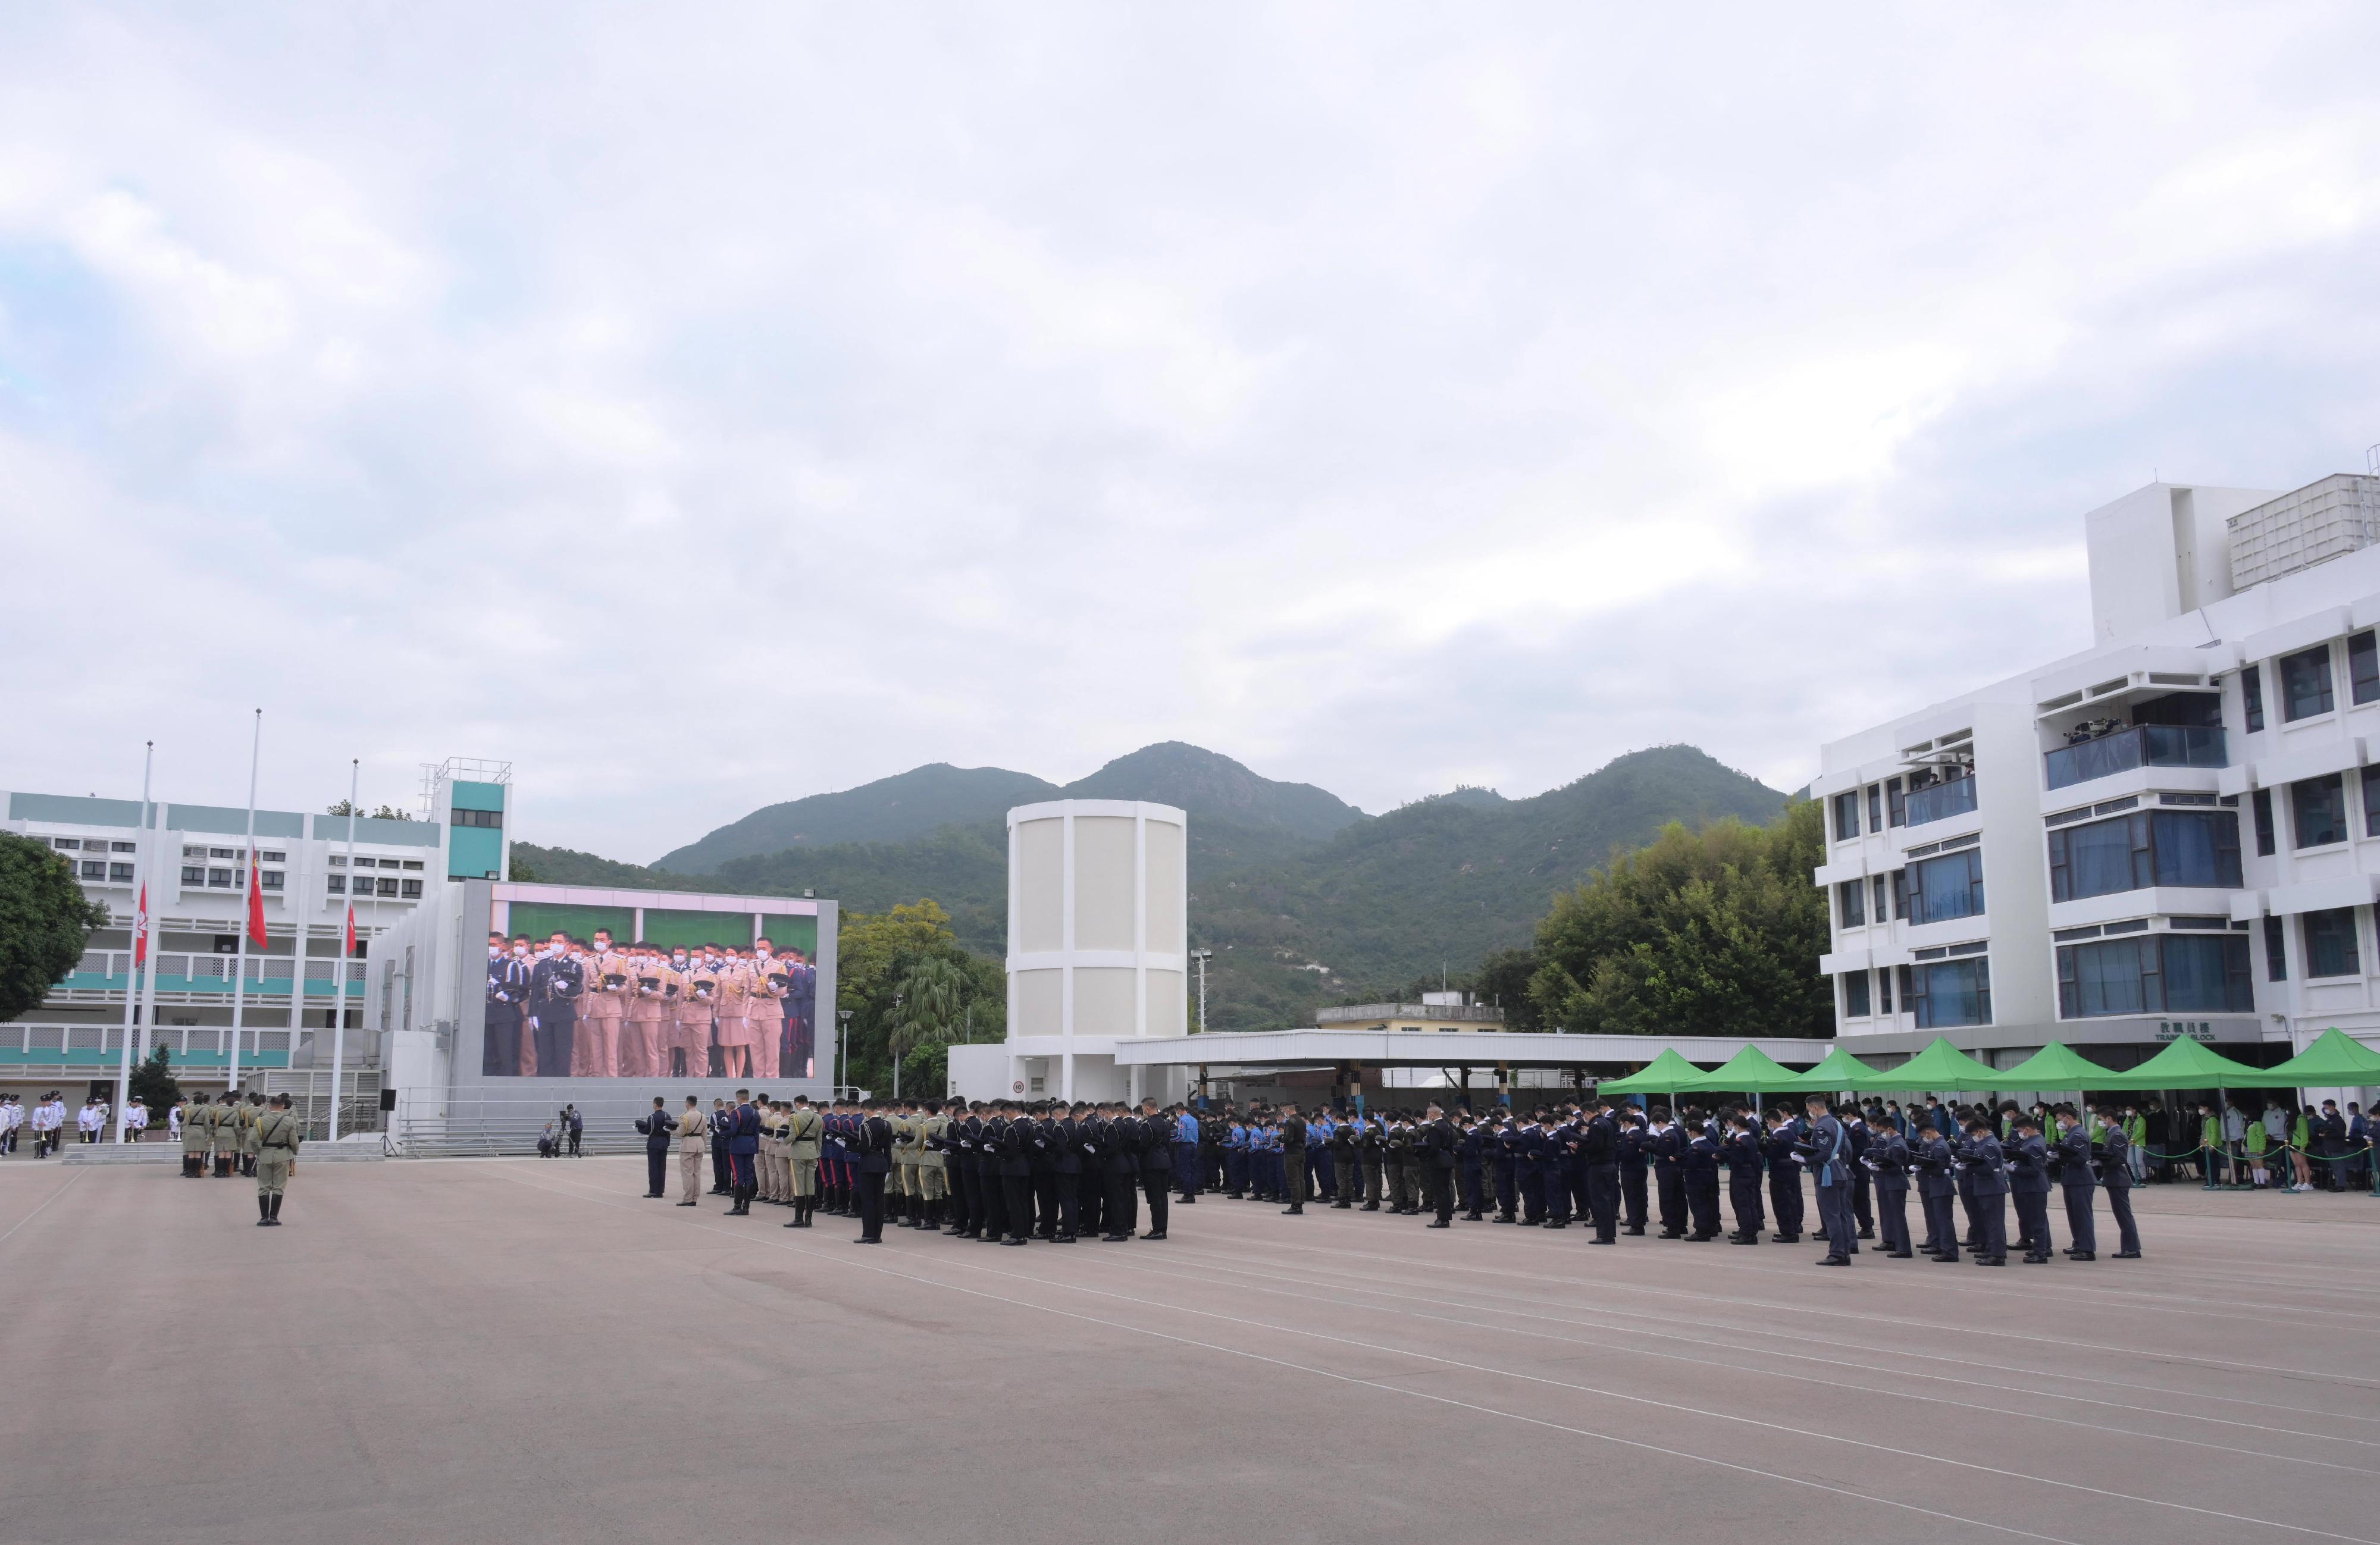 The Security Bureau held the Flag Raising Ceremony to Commemorate 40th Anniversary of Constitution today (December 4). The flag party lowered the flags to half mast and all participants observed a moment of silence to mourn the passing of Former President of the People’s Republic of China, Mr Jiang Zemin. 